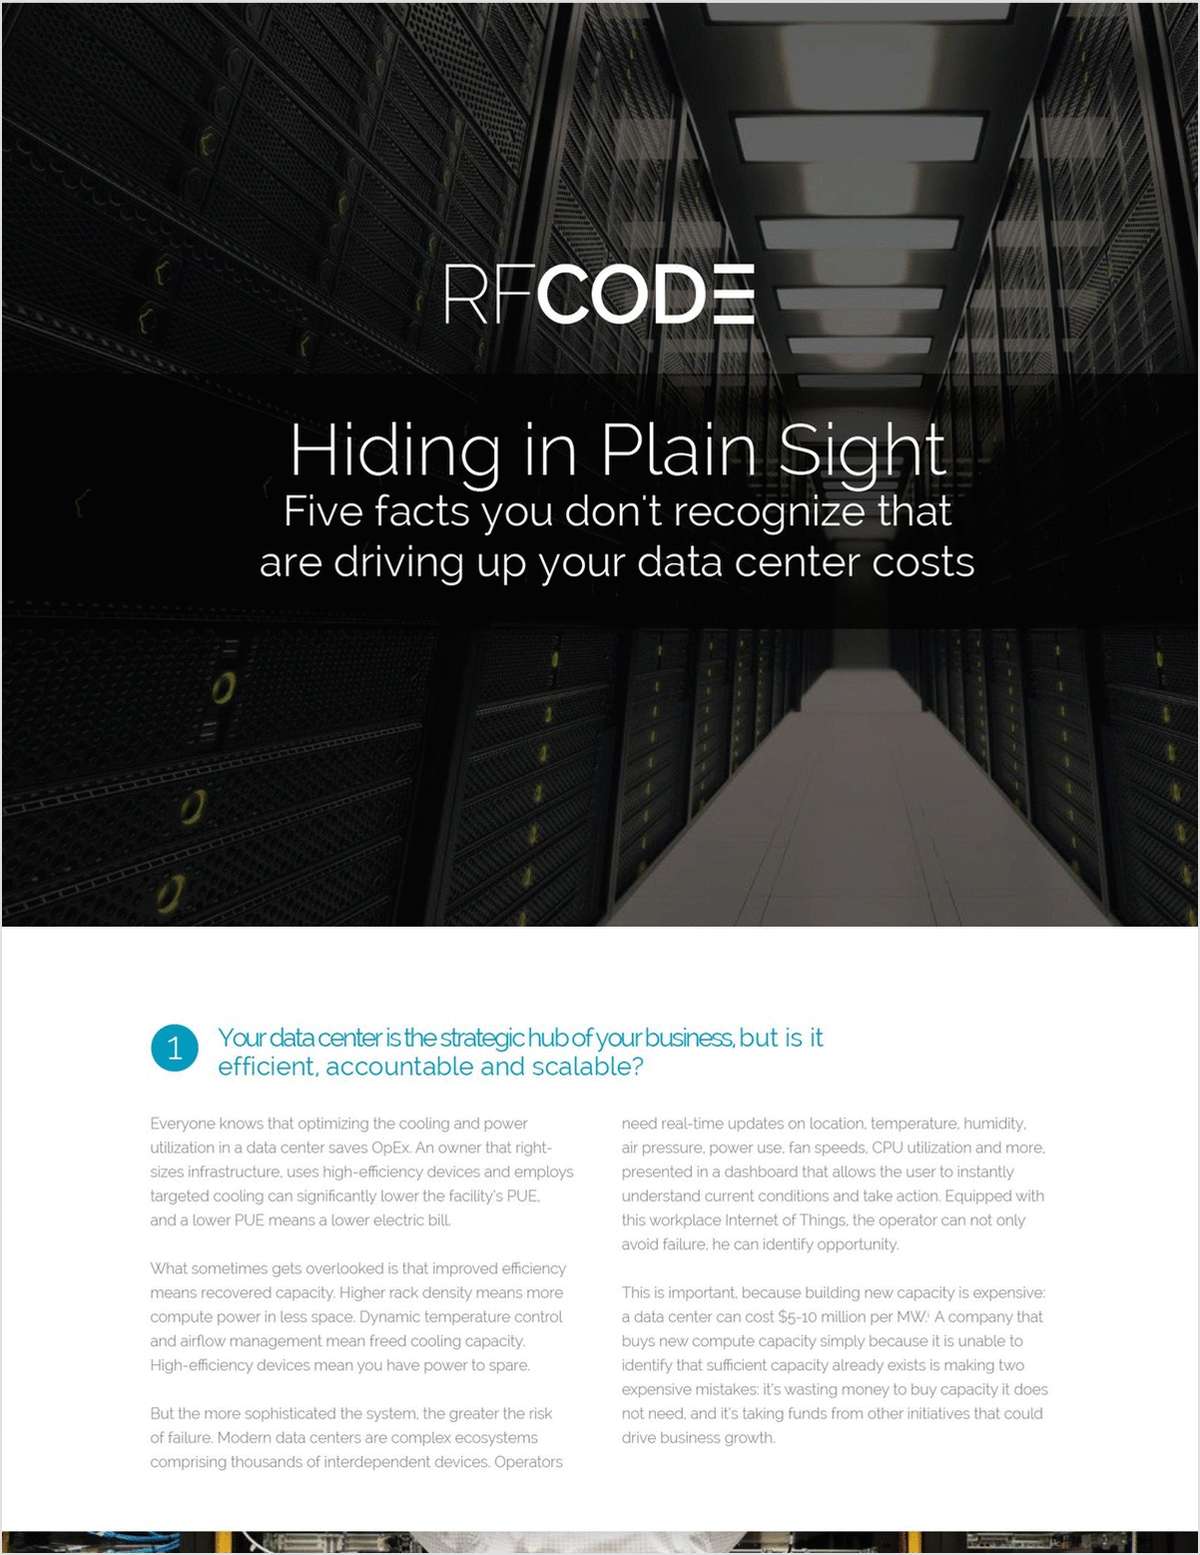 5 Data Center Facts Driving Up Costs That You Need to Recognize